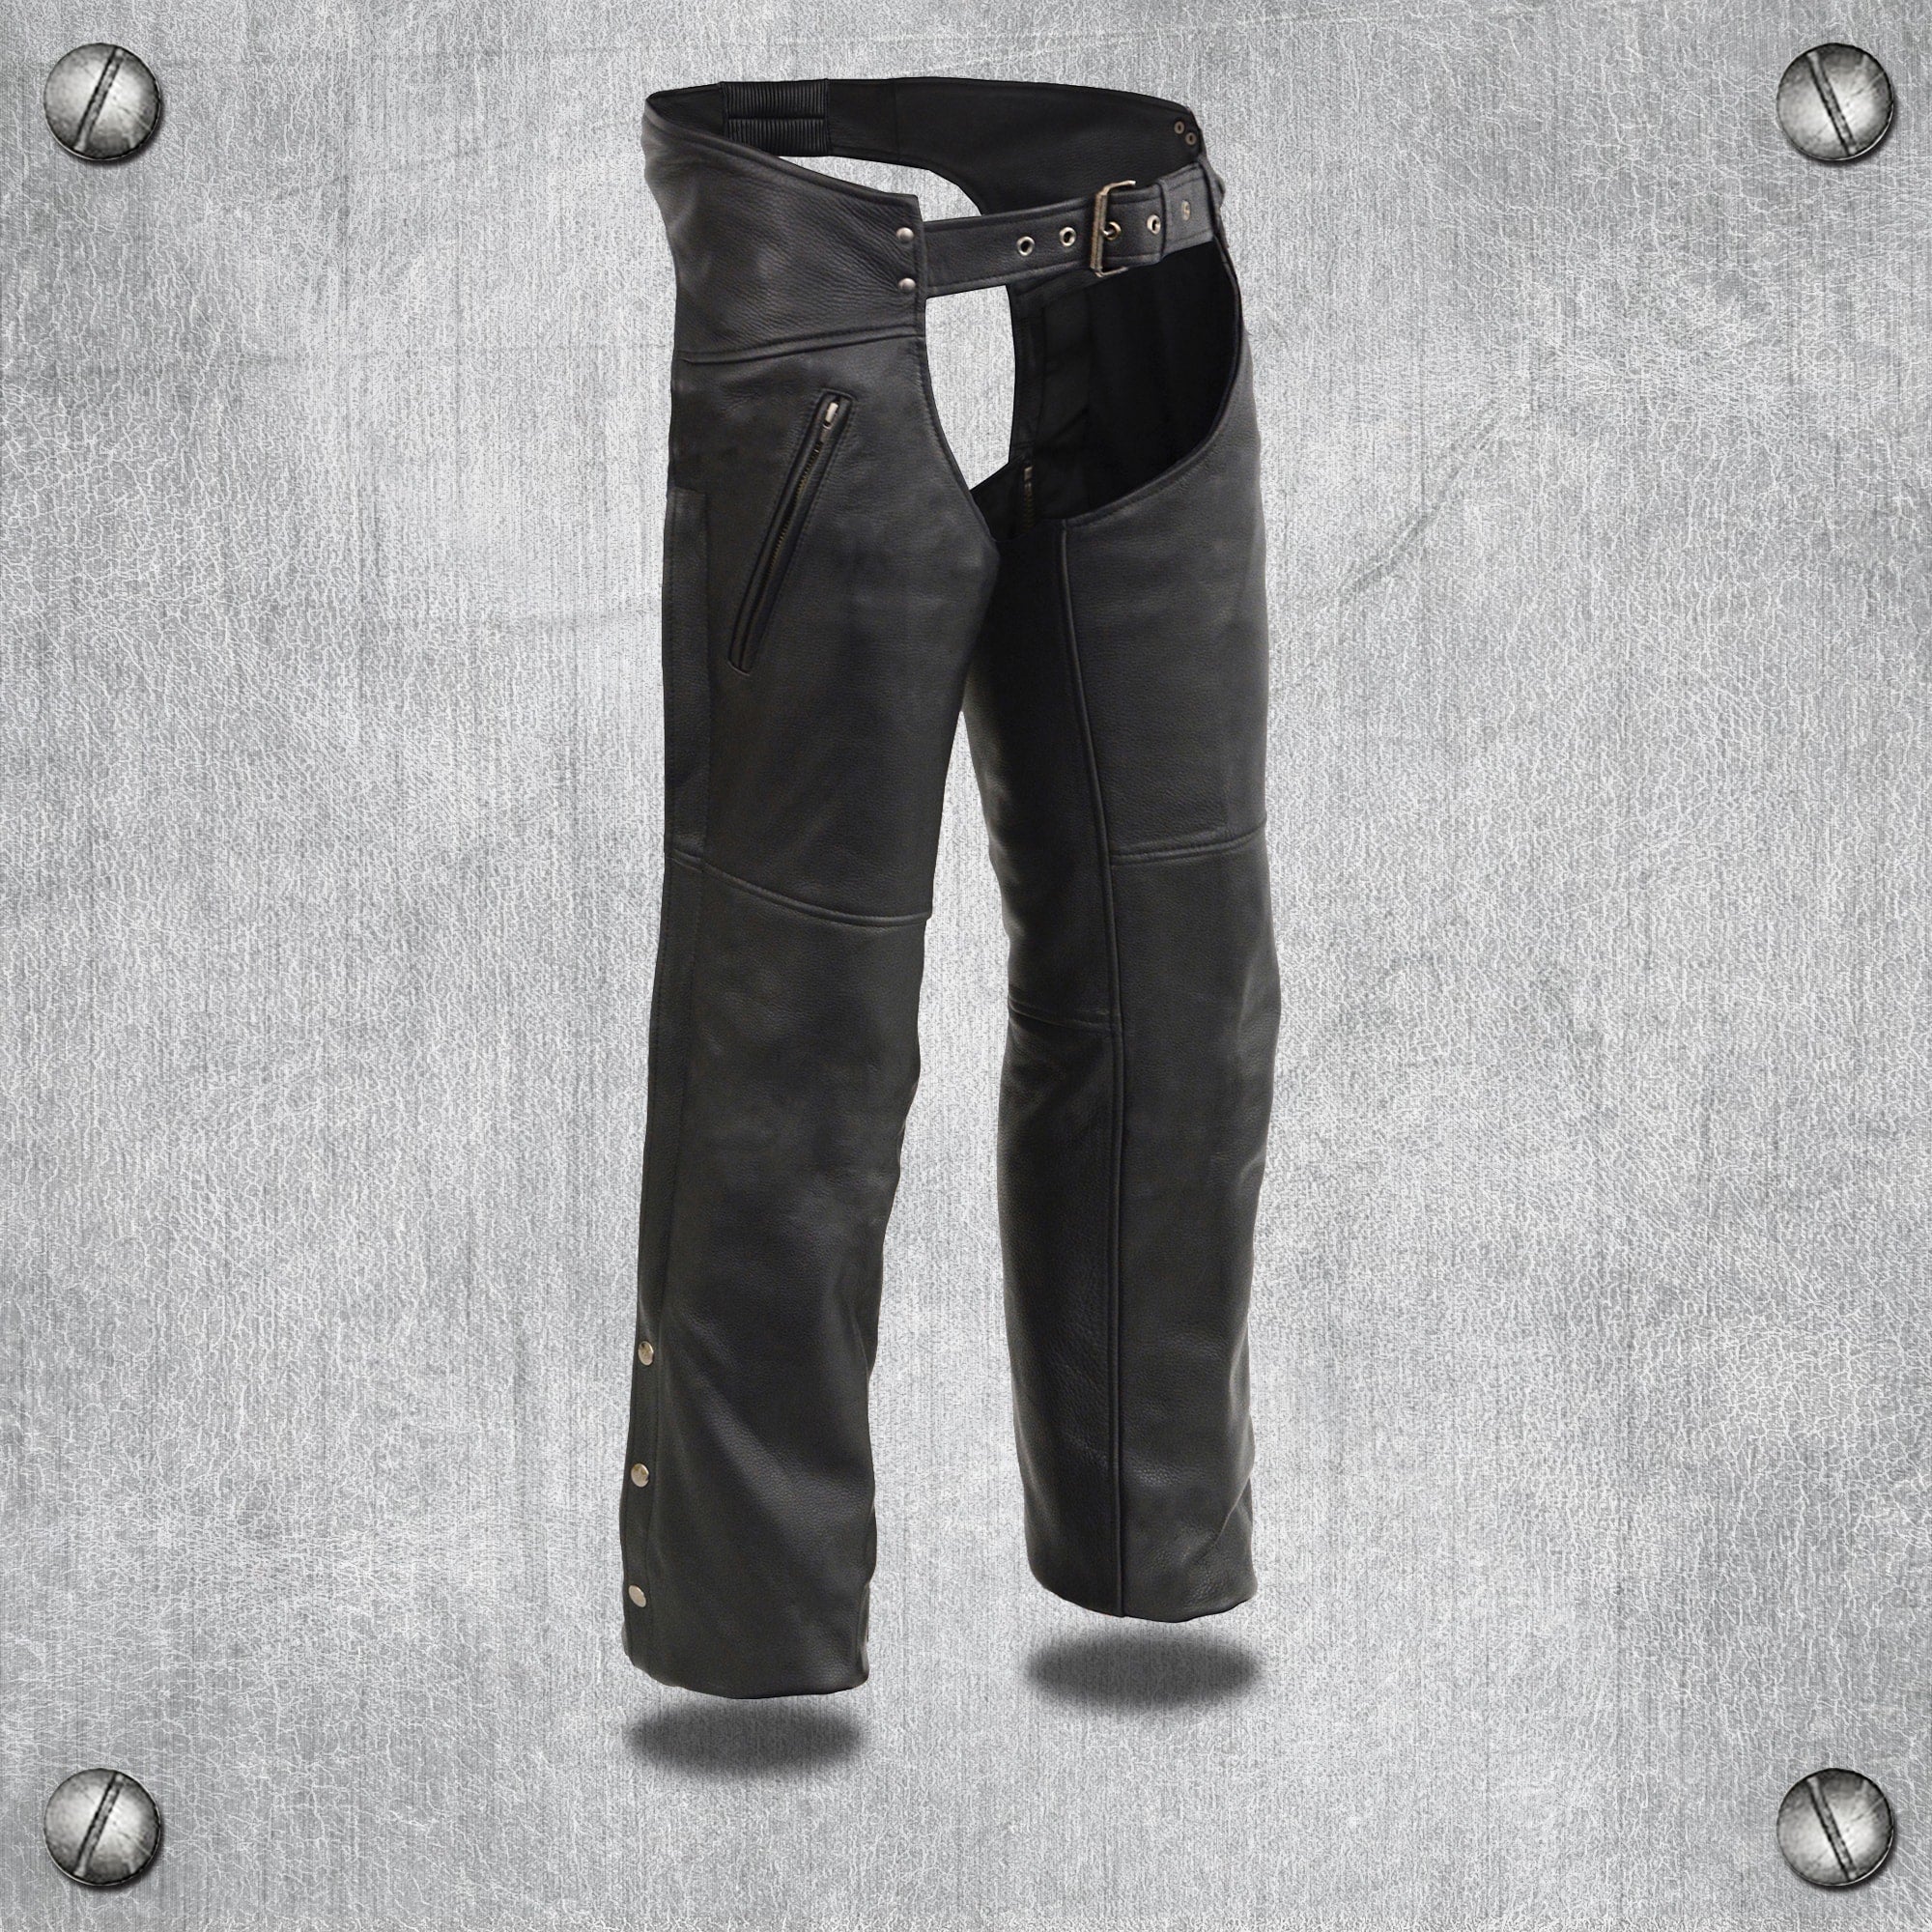 Men's Leather Chaps w/ Zippered Thigh Pockets & Heated Technology